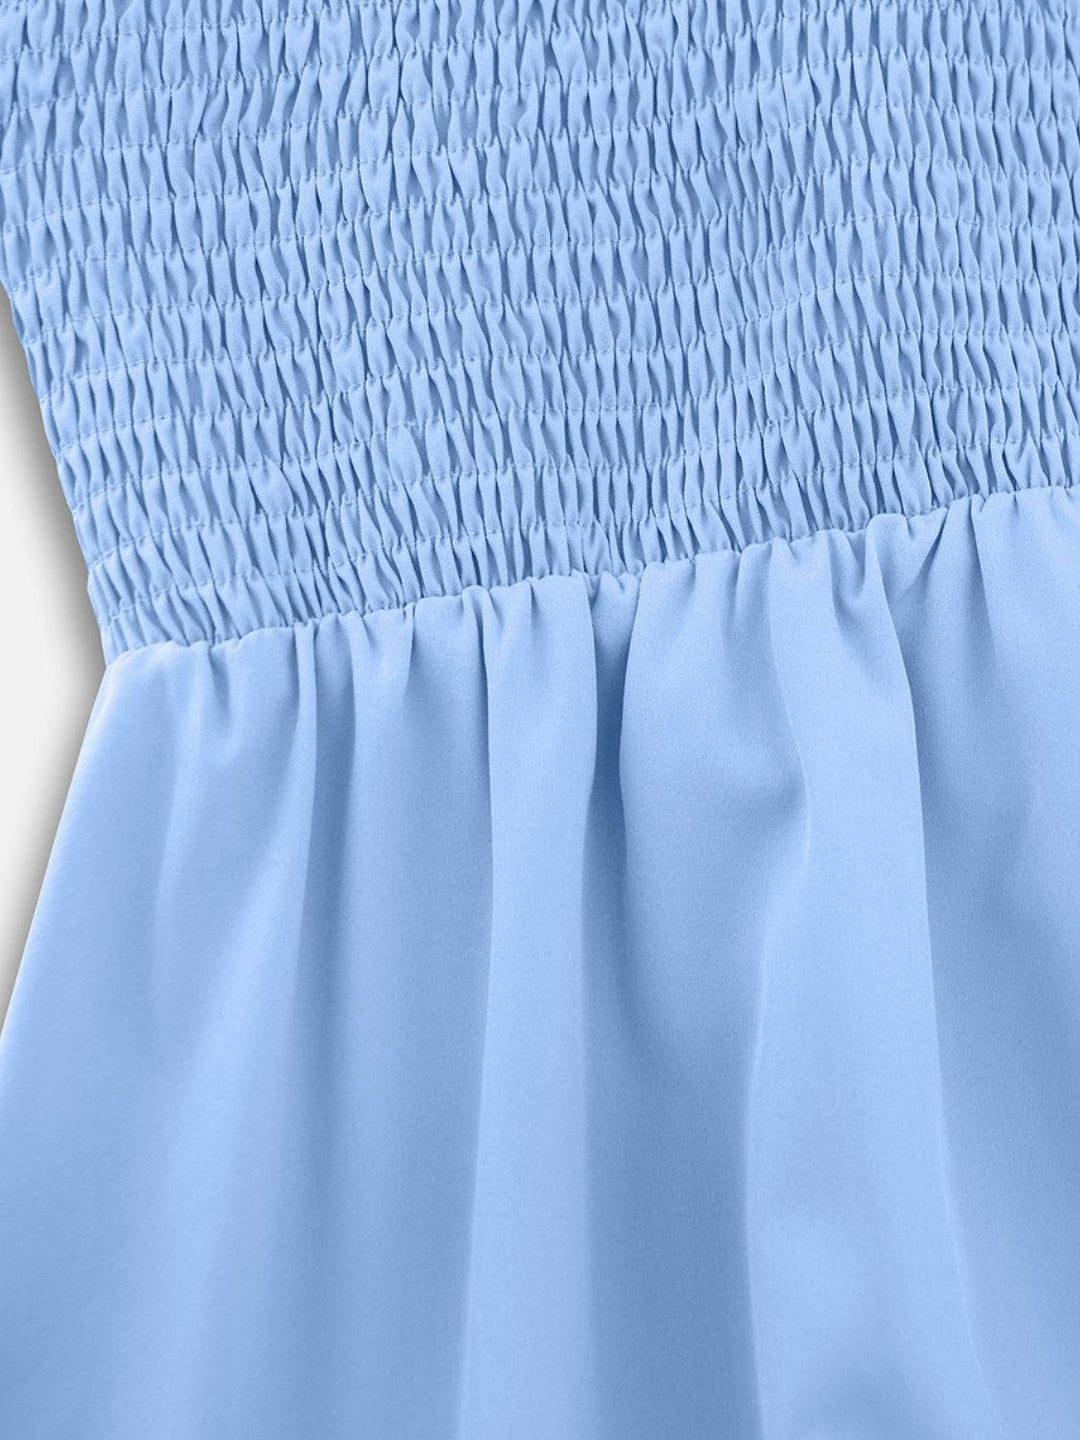 a close up of a blue dress on a white background